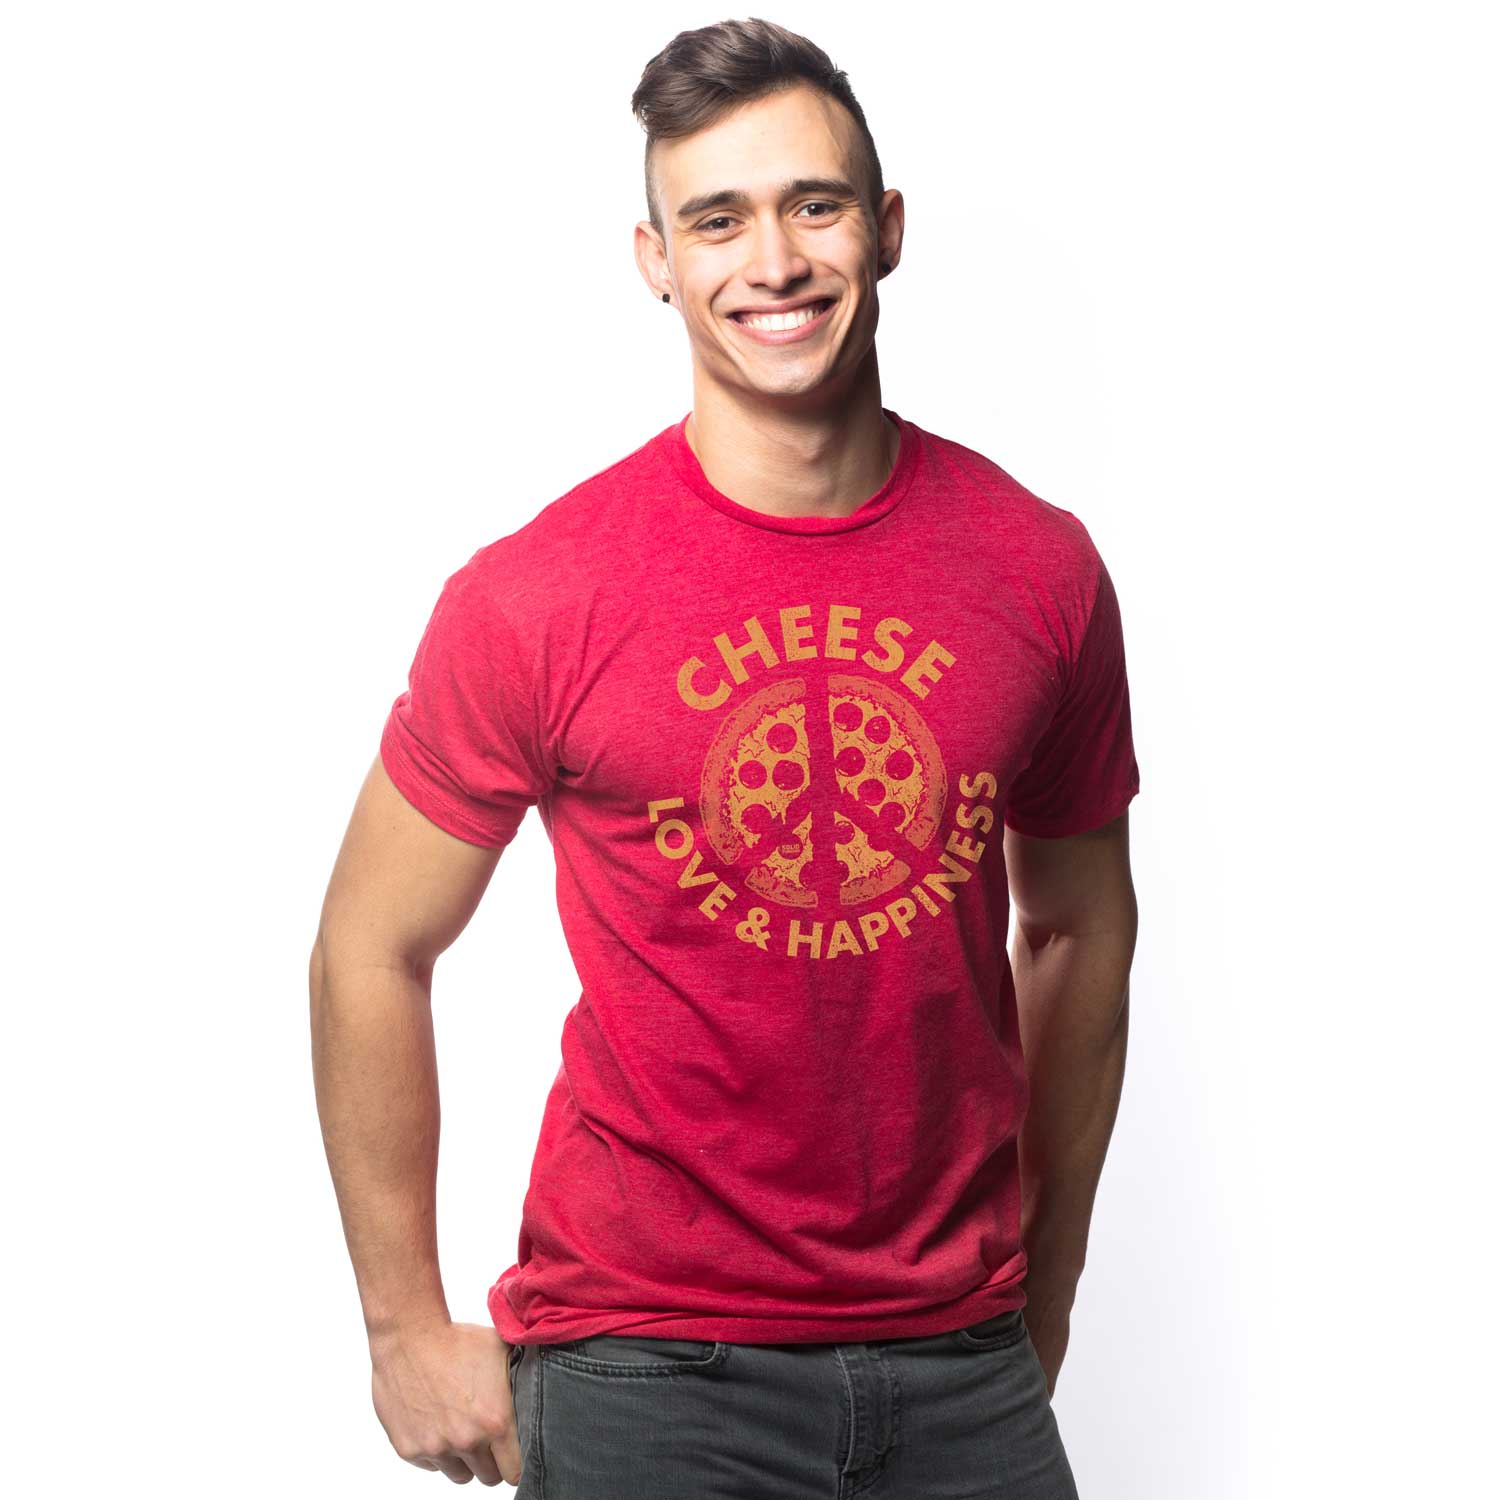 Men's Cheese Love & Happiness Vintage Graphic Tee | Retro Pizza T-Shirt On Model | Solid Threads